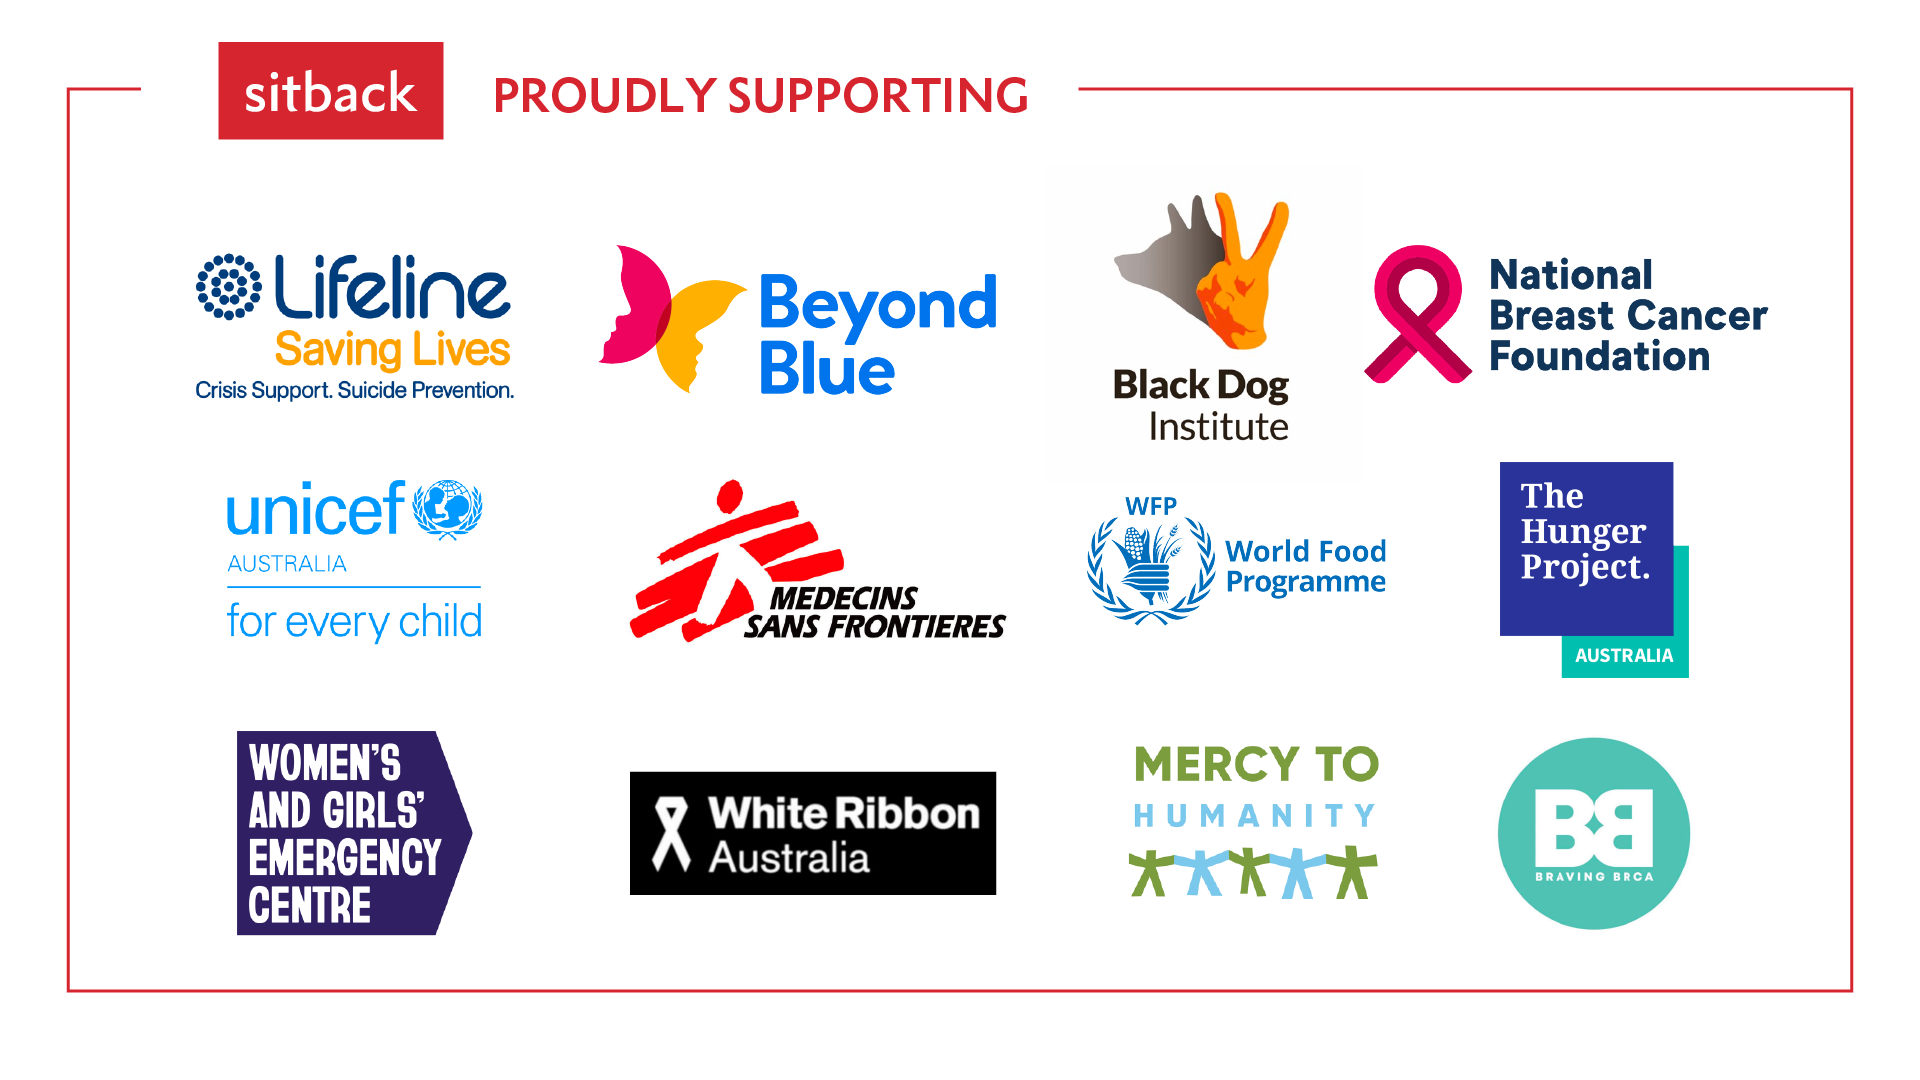 Sitback proudly supports Lifeline, Beyond Blue, Black Dog Institute, National Breast Cancer Foundation, Unicef Australia, Medecins Sans Frontieres, World Food Programme, The Hunger Project, Women and Girls' Emergency Centre, White Ribbon Australia, Mercy to Humanity and Braving BRCA.